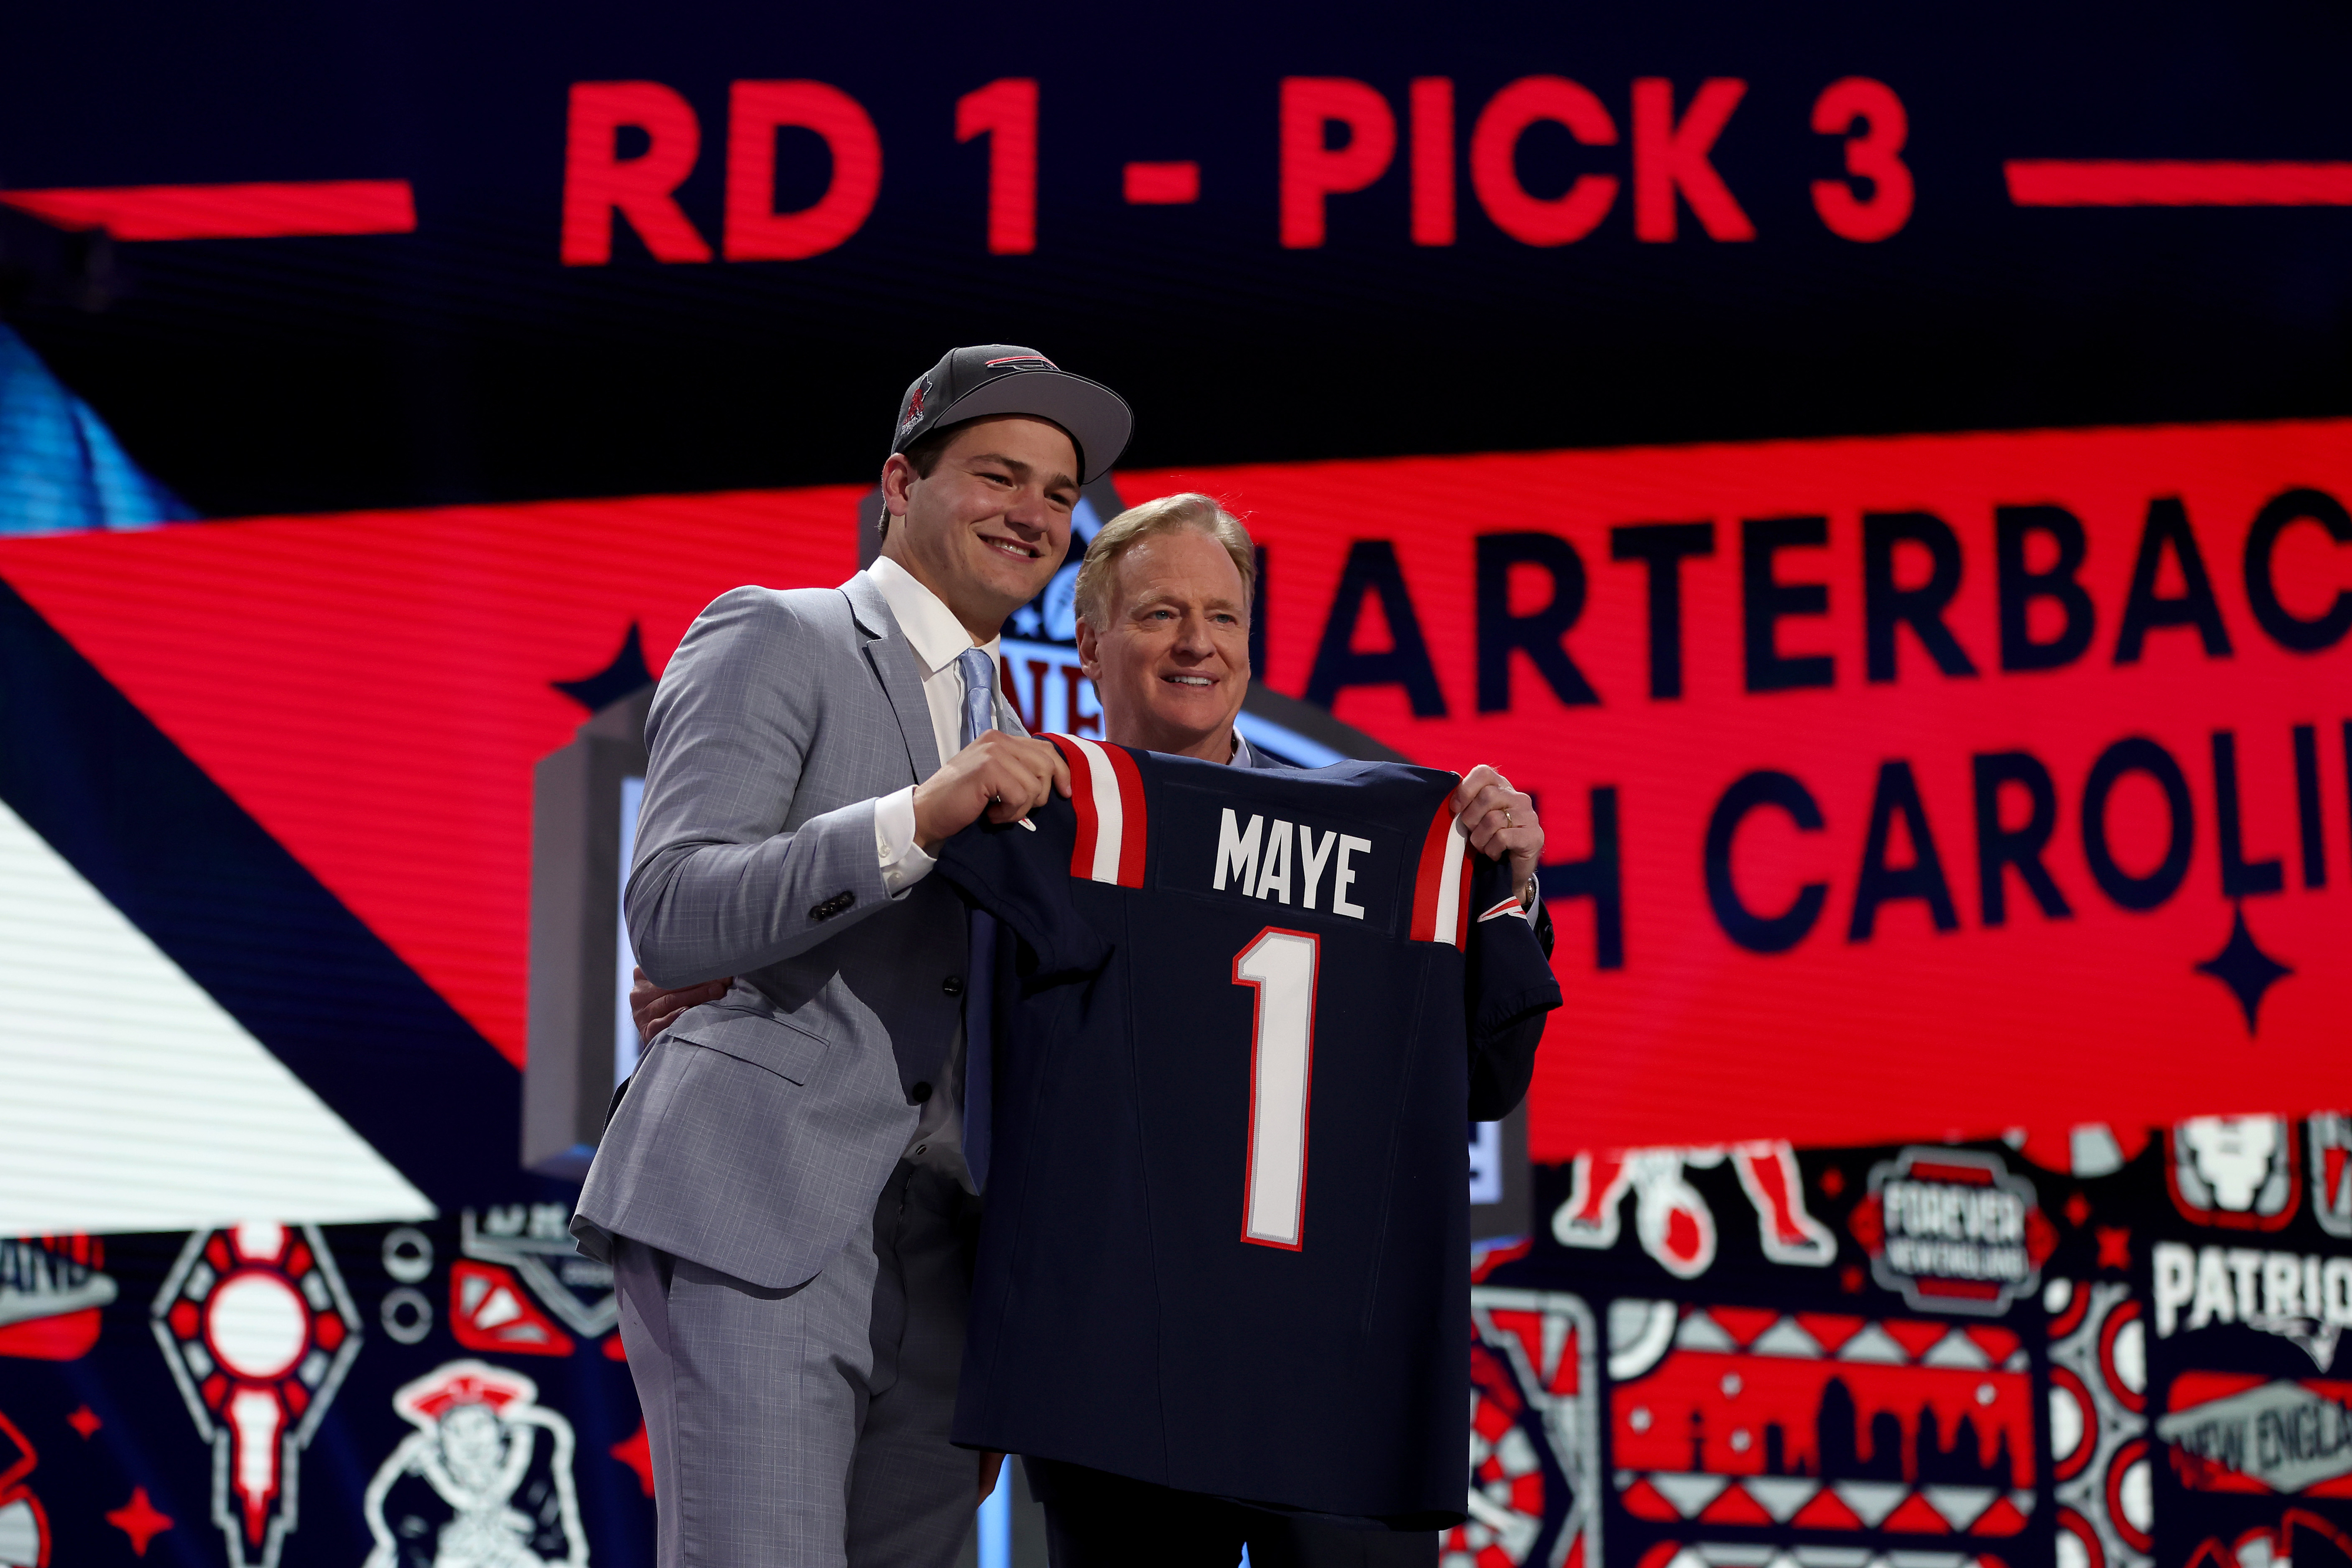 Two individuals at a sports draft event holding a jersey with the text &quot;MAYE 1&quot;